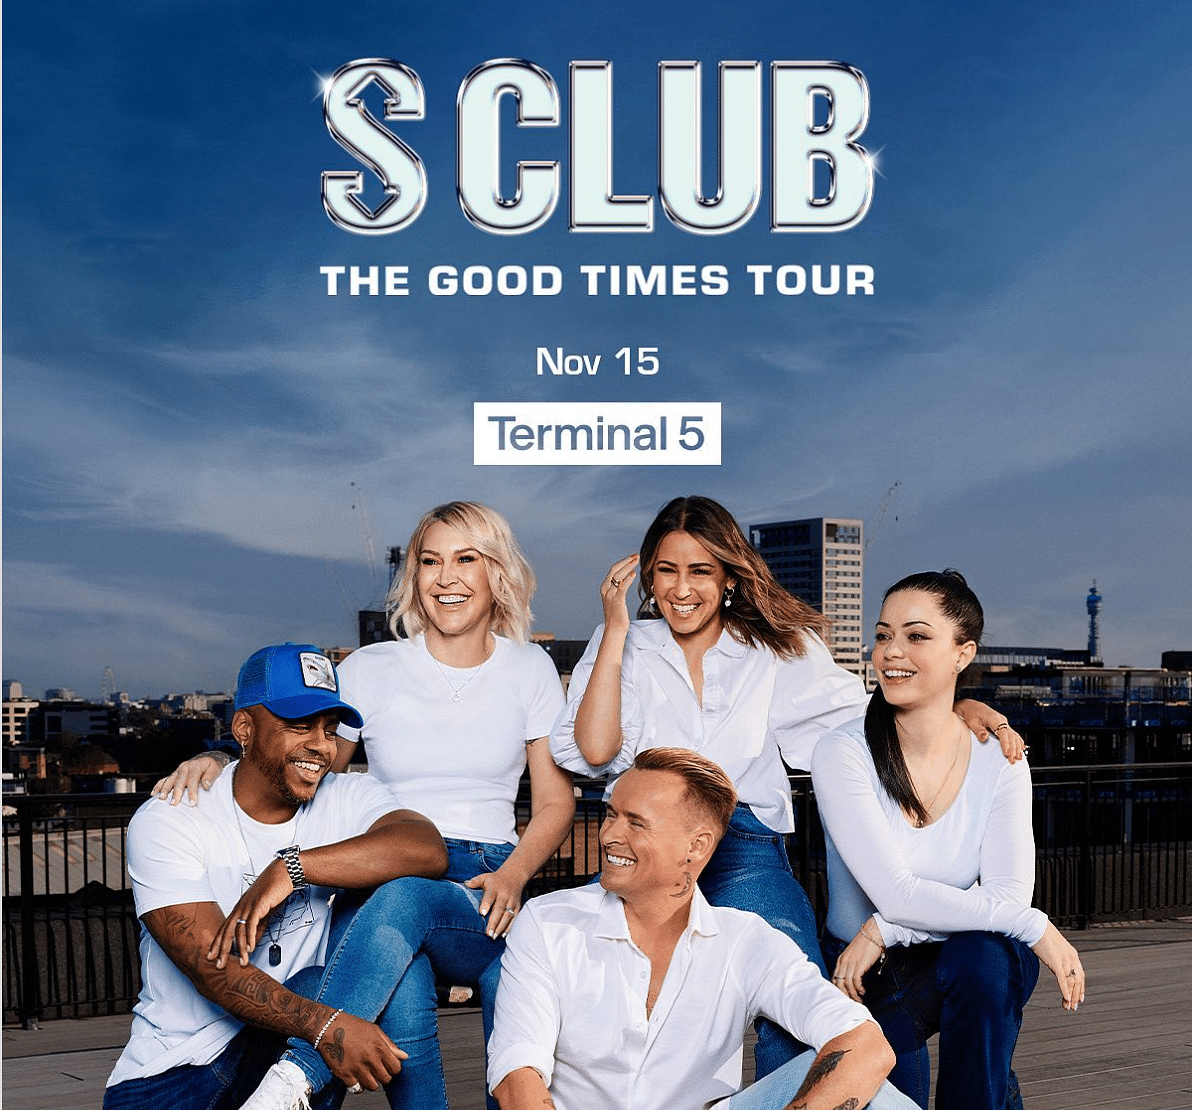 Concert Review: S Club - Good Times Tour - Terminal 5, NYC